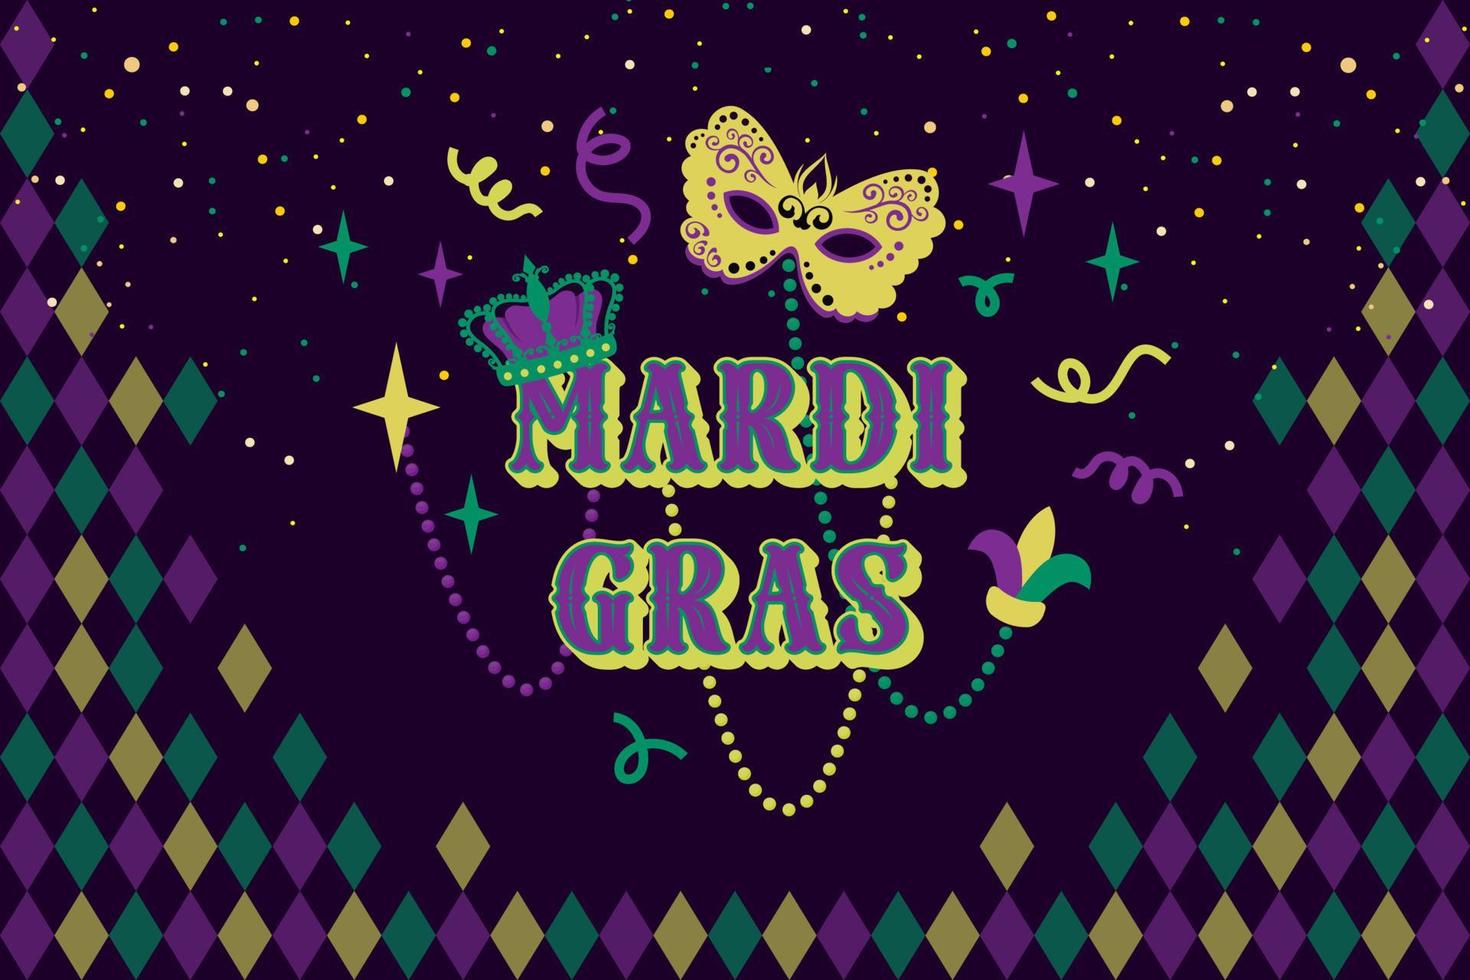 Mardi Gras greeting banner. Traditional carnival mask, beads, royal crown, confetti for holiday. Template for celebration costume party, masquerade ball. Vector illustration for invitation, flyer